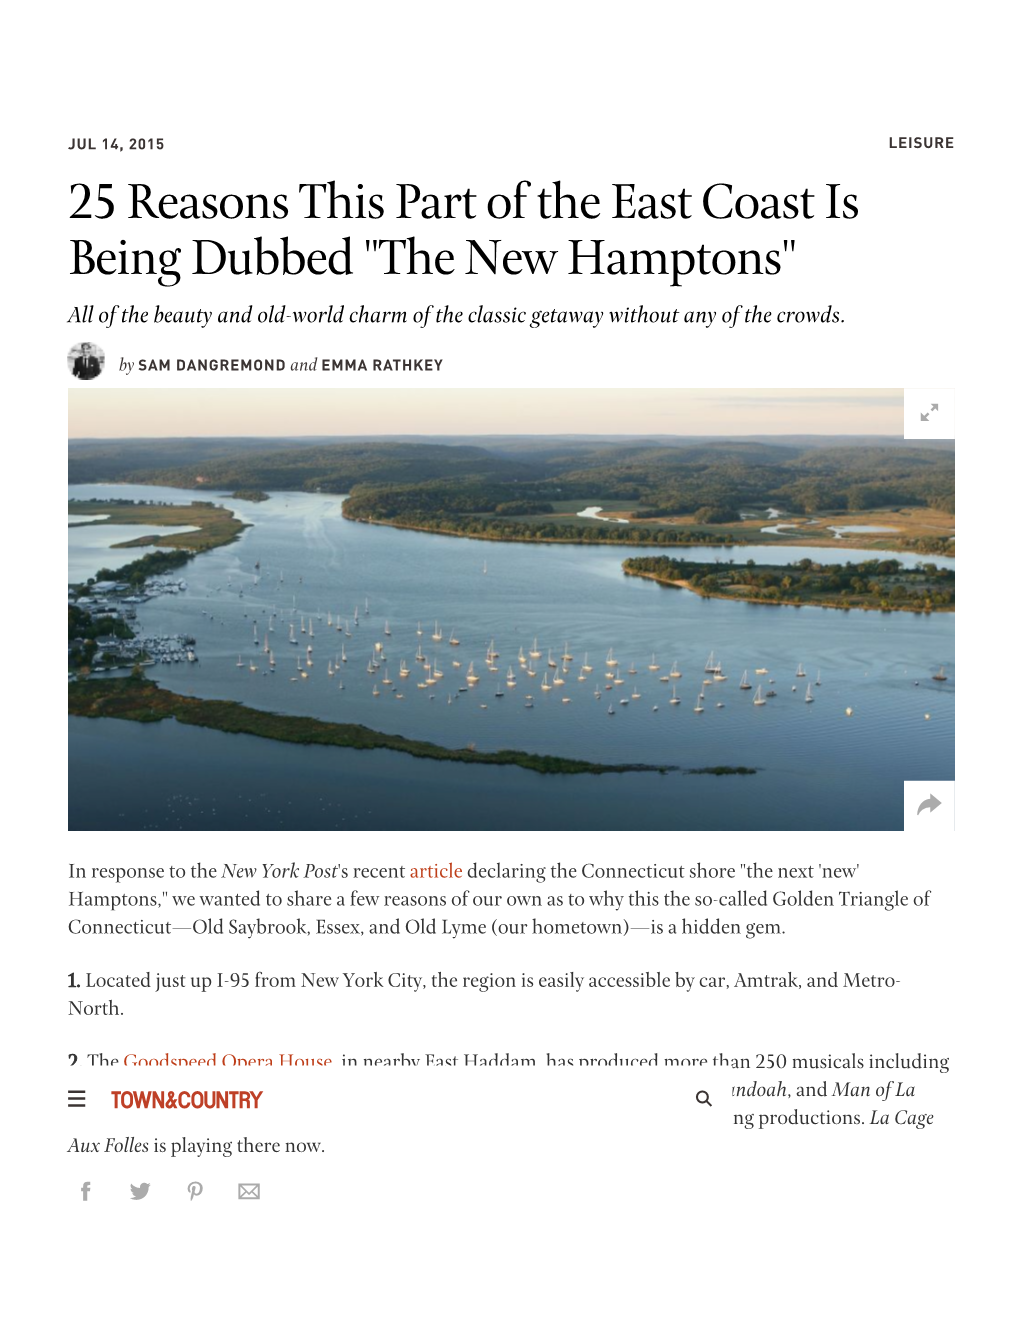 25 Reasons This Part of the East Coast Is Being Dubbed "The New Hamptons" All of the Beauty and Old-World Charm of the Classic Getaway Without Any of the Crowds